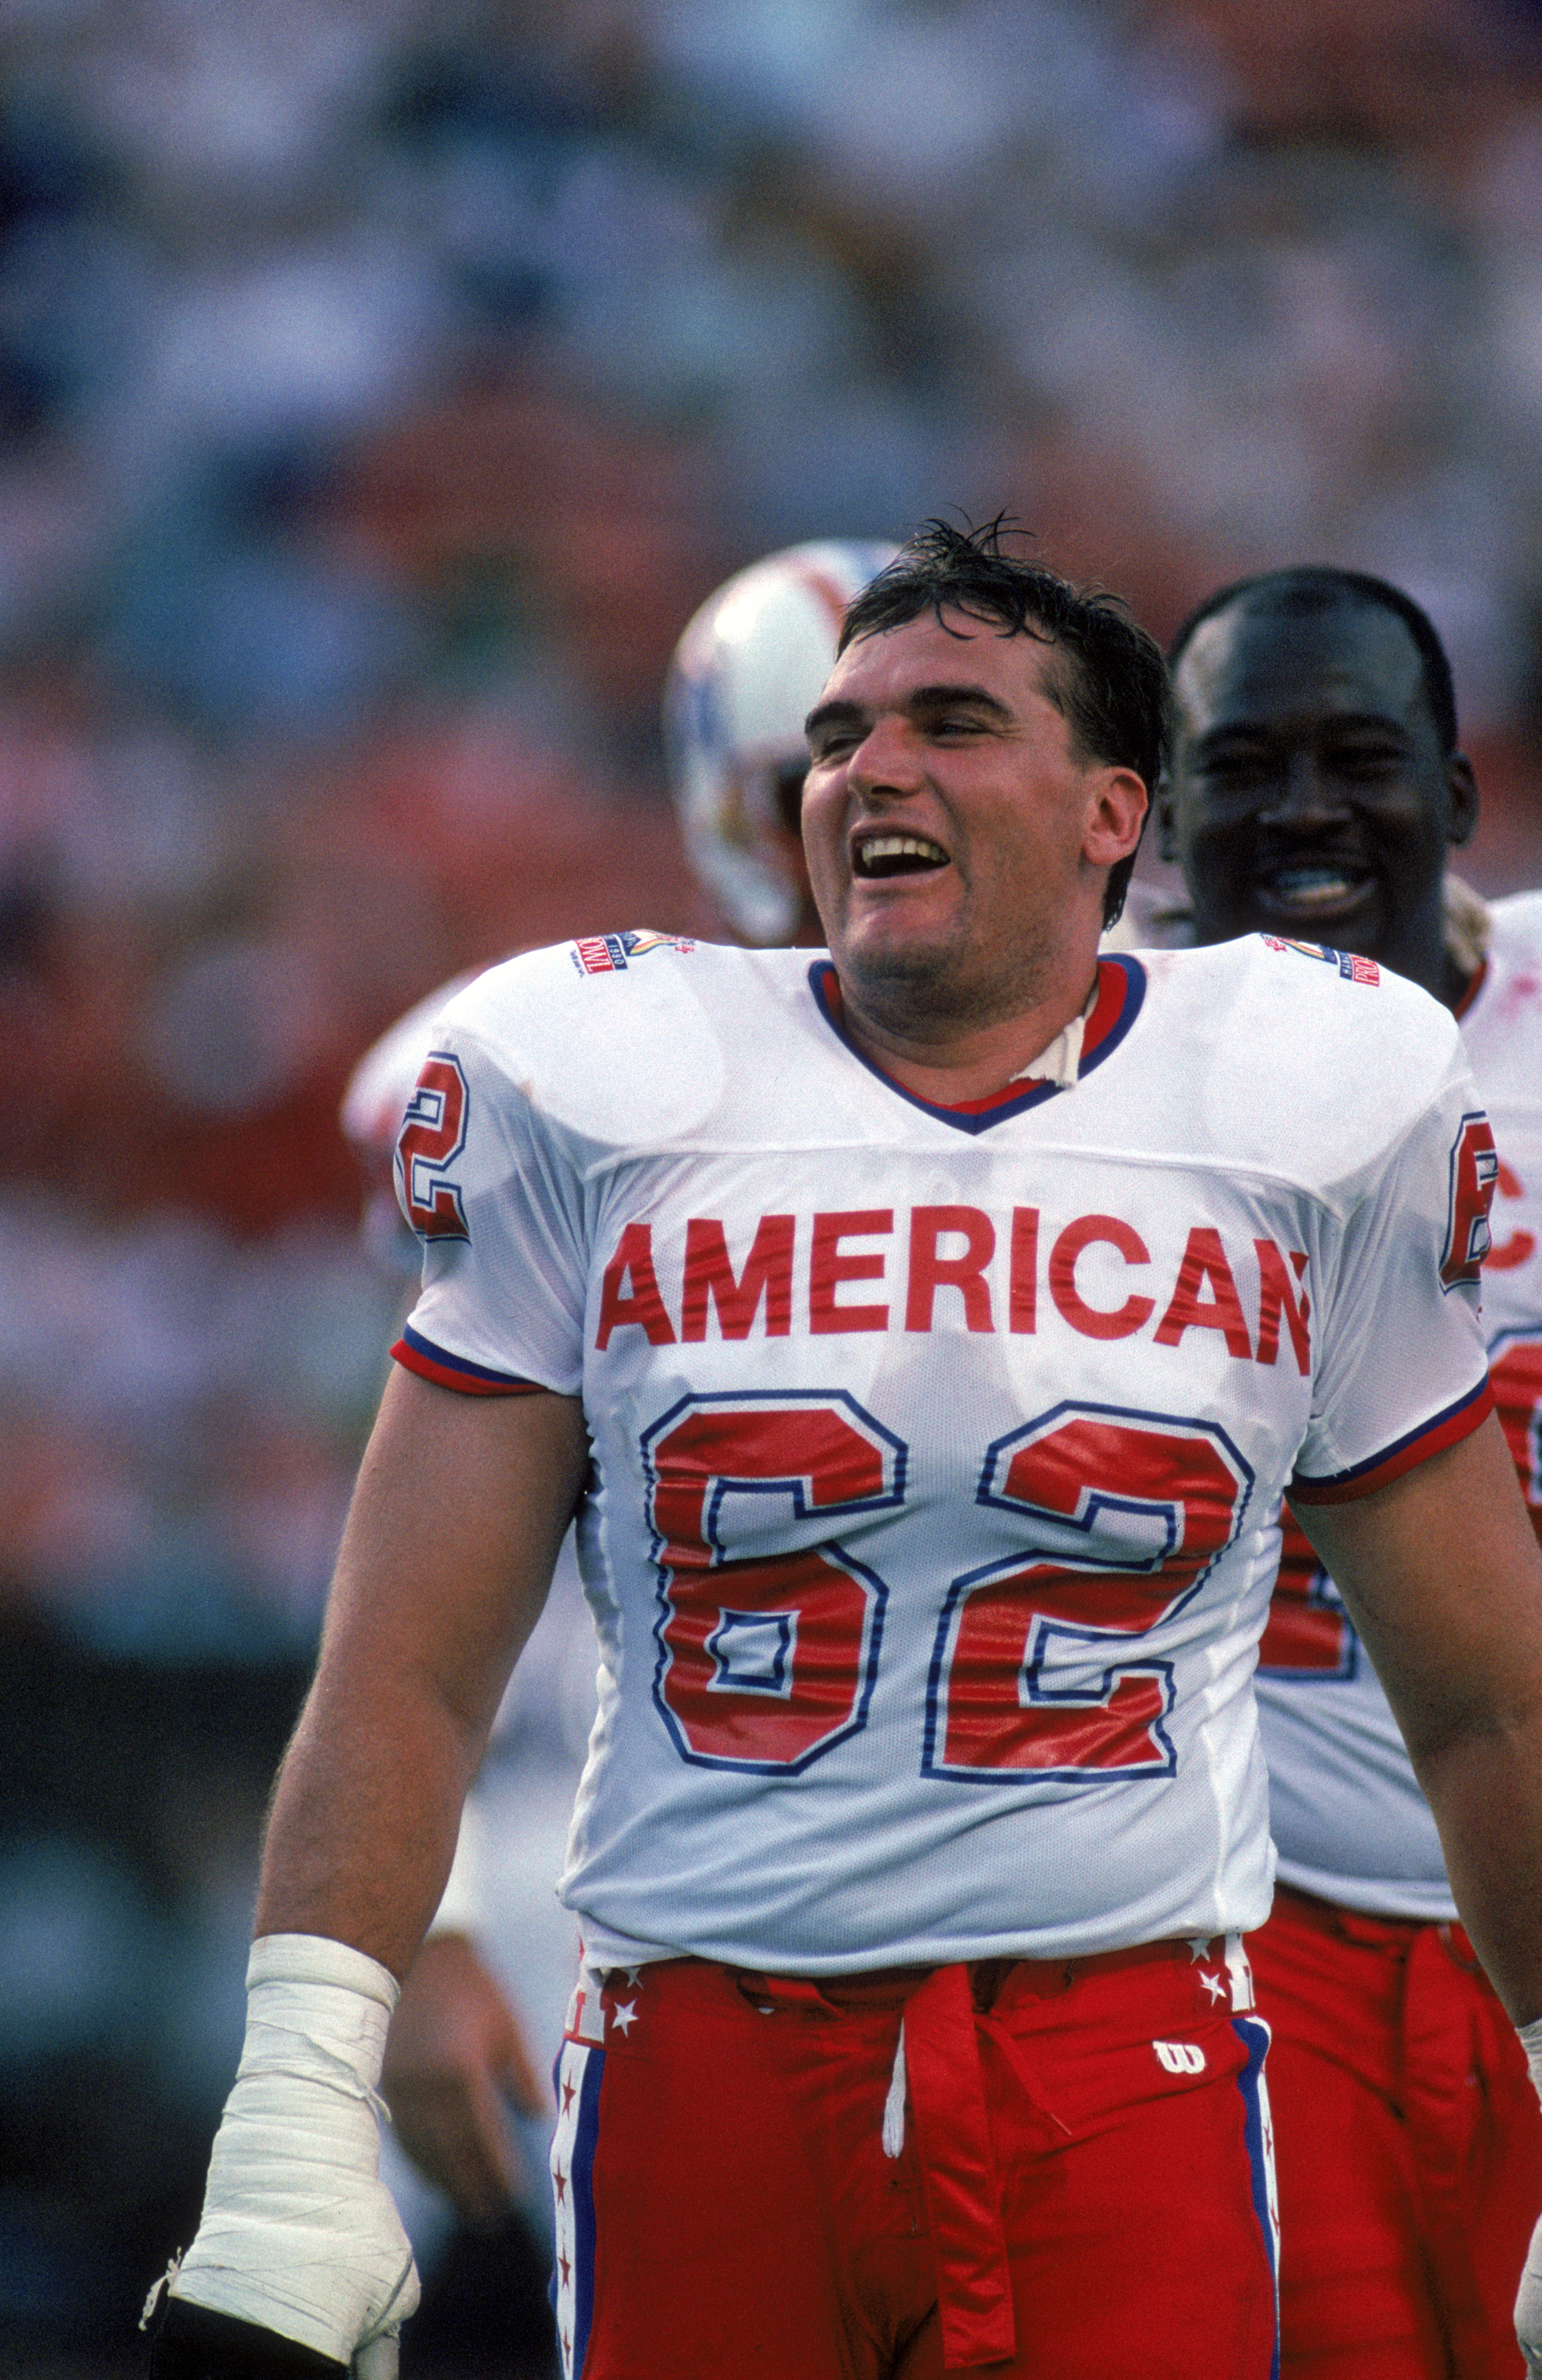 HONOLULU, HI - FEBRUARY 4:  Buffalo Bills offensive tackle Tunch Ilkin #62 of the AFC squad laughs during the 1990 NFL Pro Bowl at Aloha Stadium on February 4, 1990 in Honolulu, Hawaii.  The NFC won 27-21.  (Photo by George Rose/Getty Images)